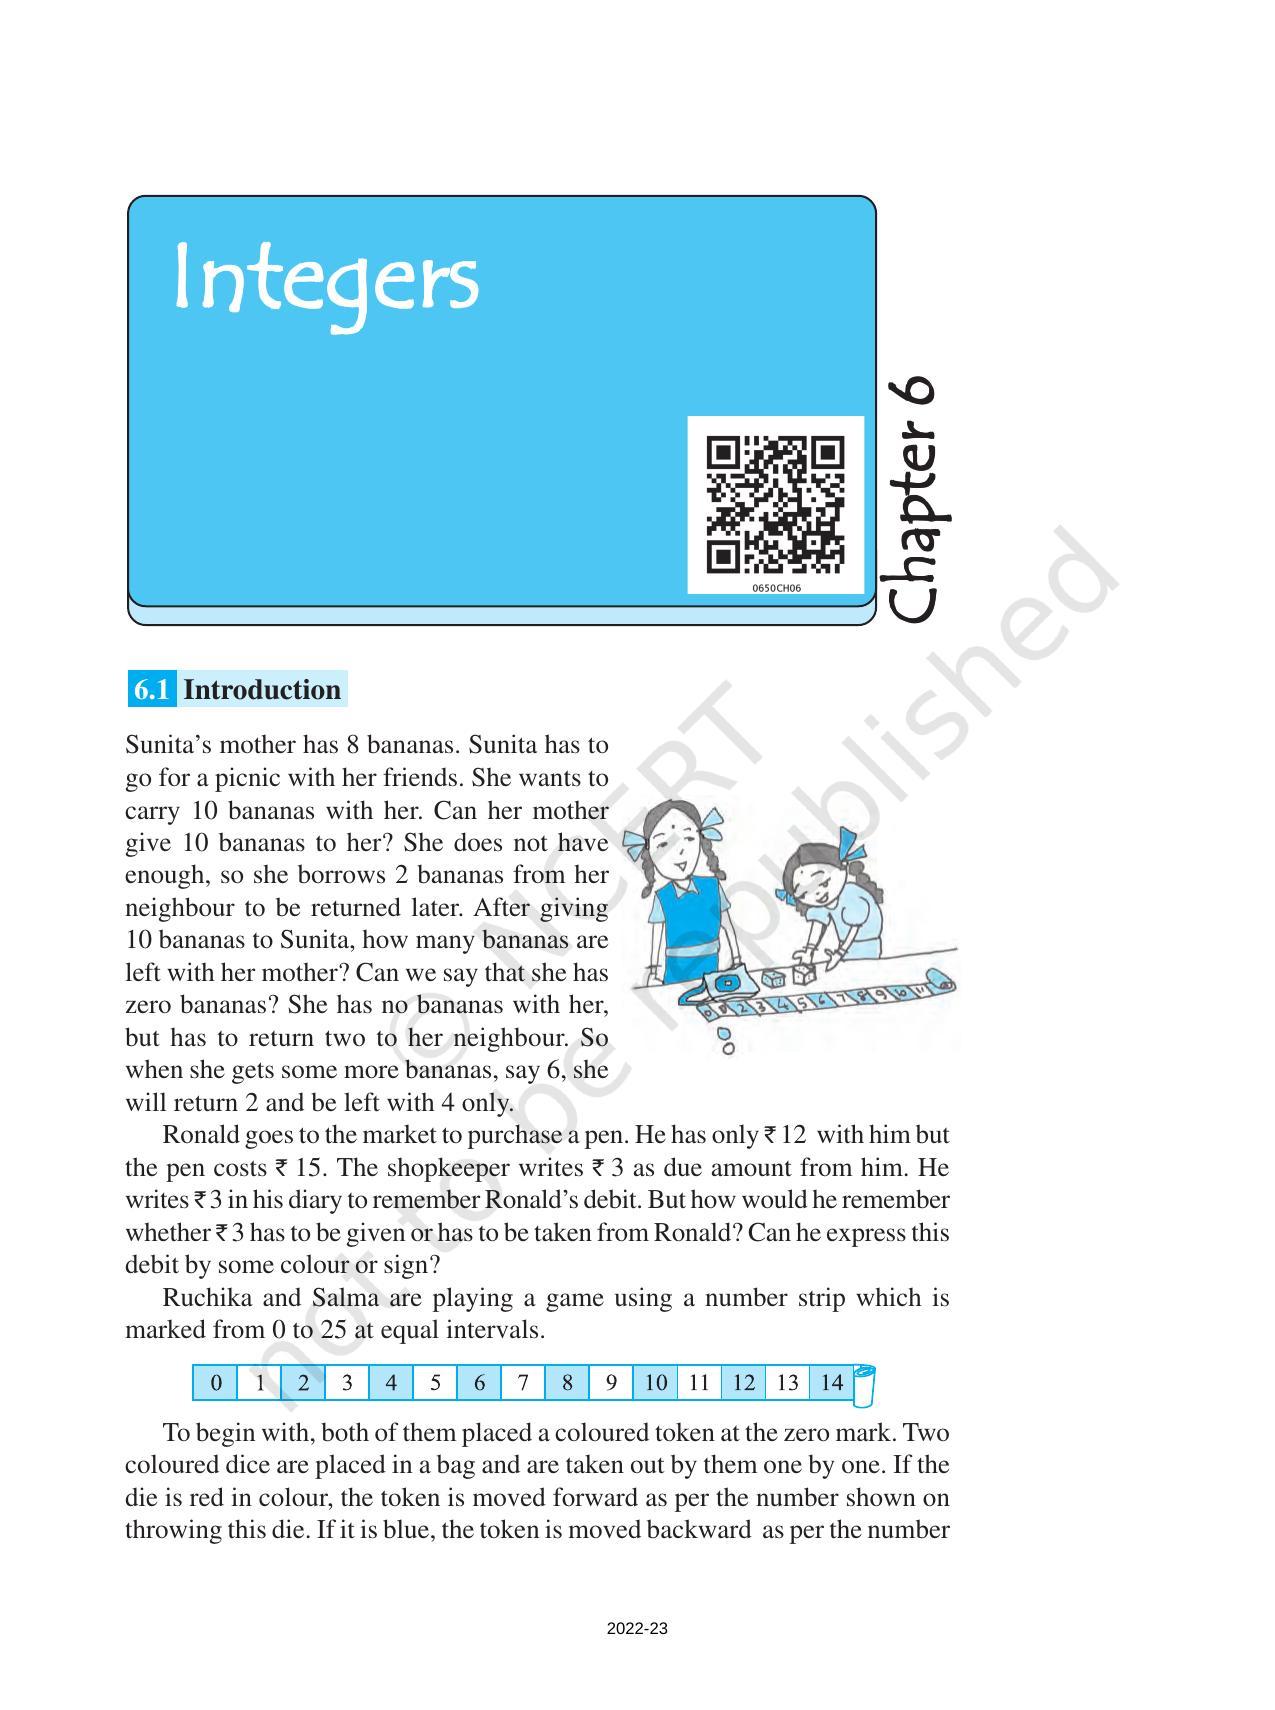 NCERT Book for Class 6 Maths: Chapter 6-Integers - Page 1